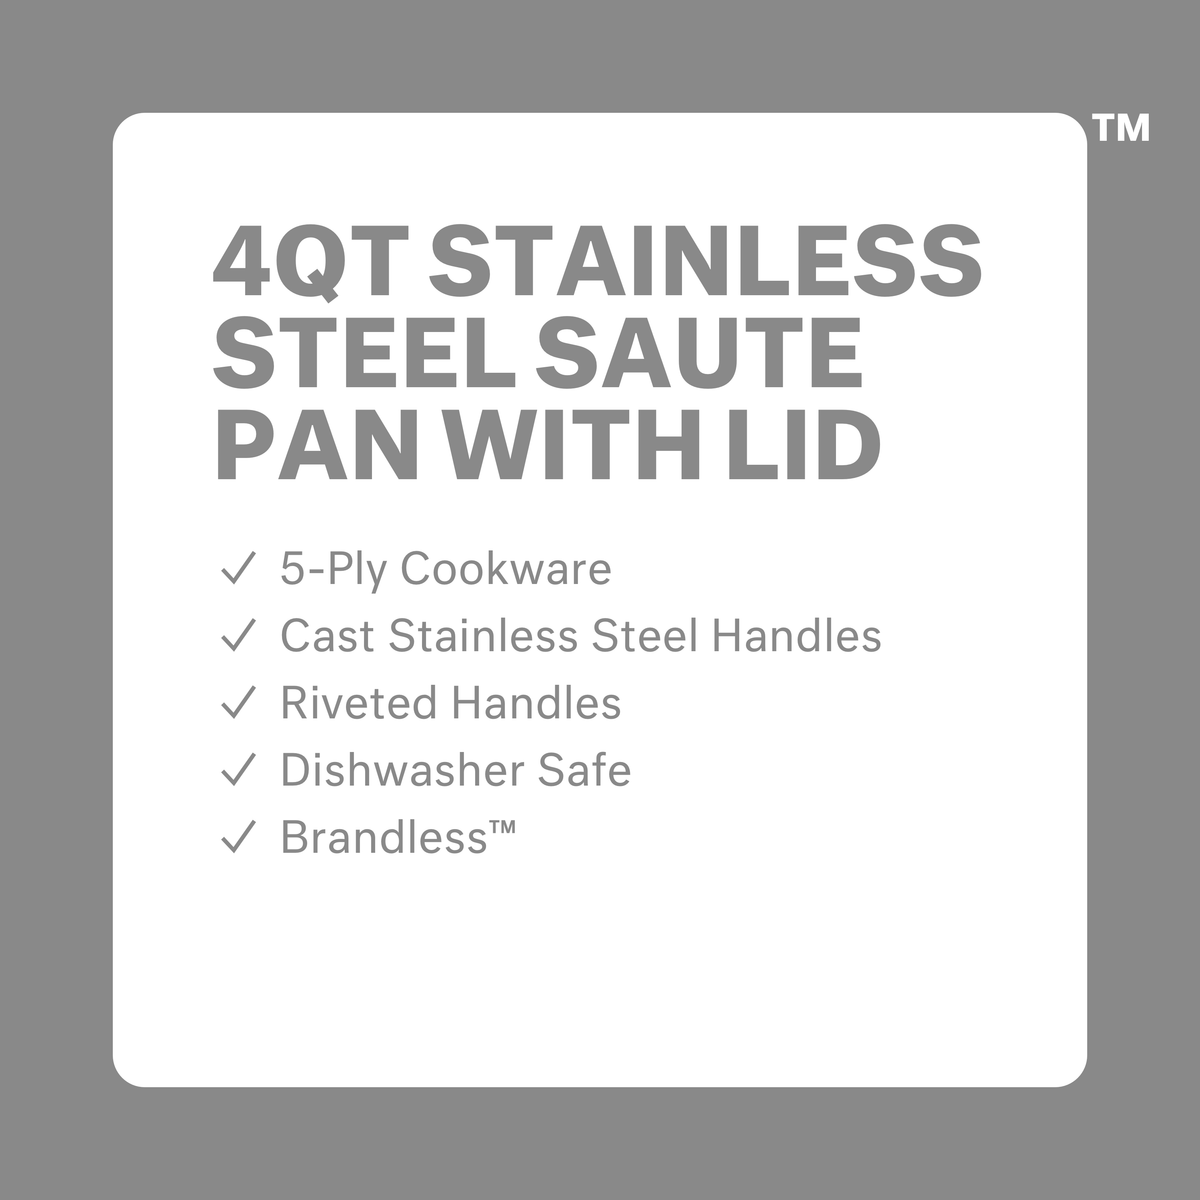 4 quart saute pan with lid. 5-ply cookware. Cast stainless steel handles. Riveted Handles. Dishwasher safe. Brandless.